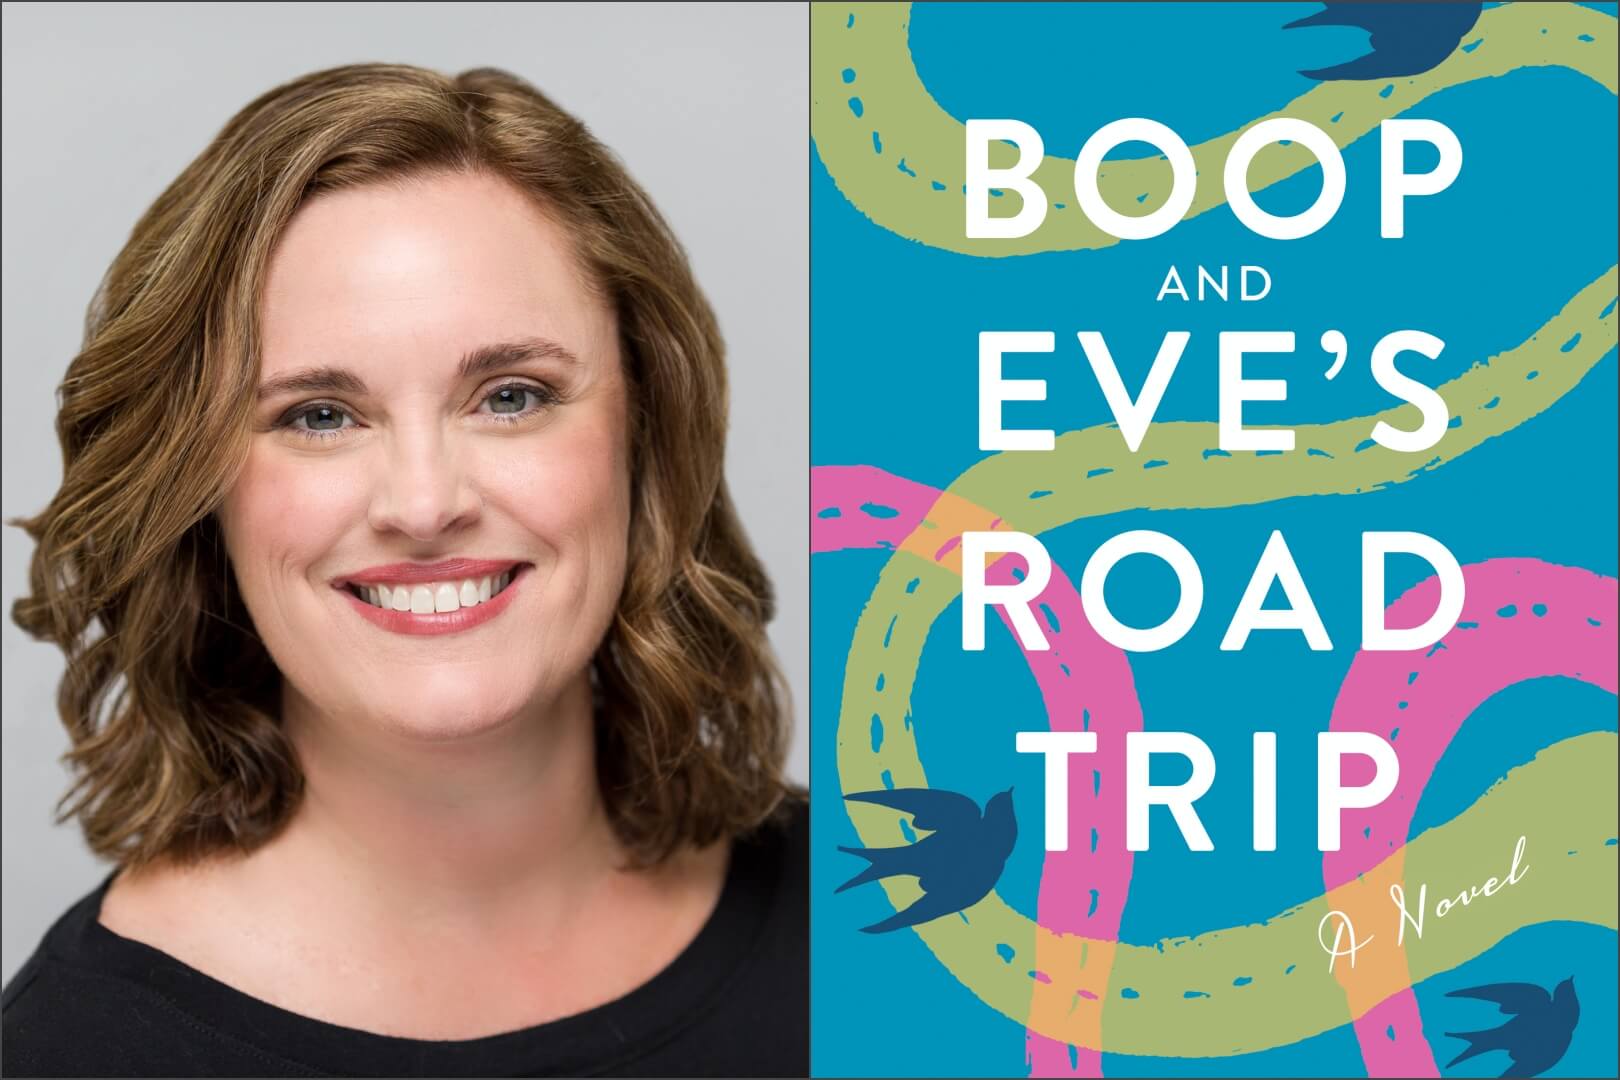 Q&A with Mary Sheriff, Author of Boop and Eve’s Road Trip